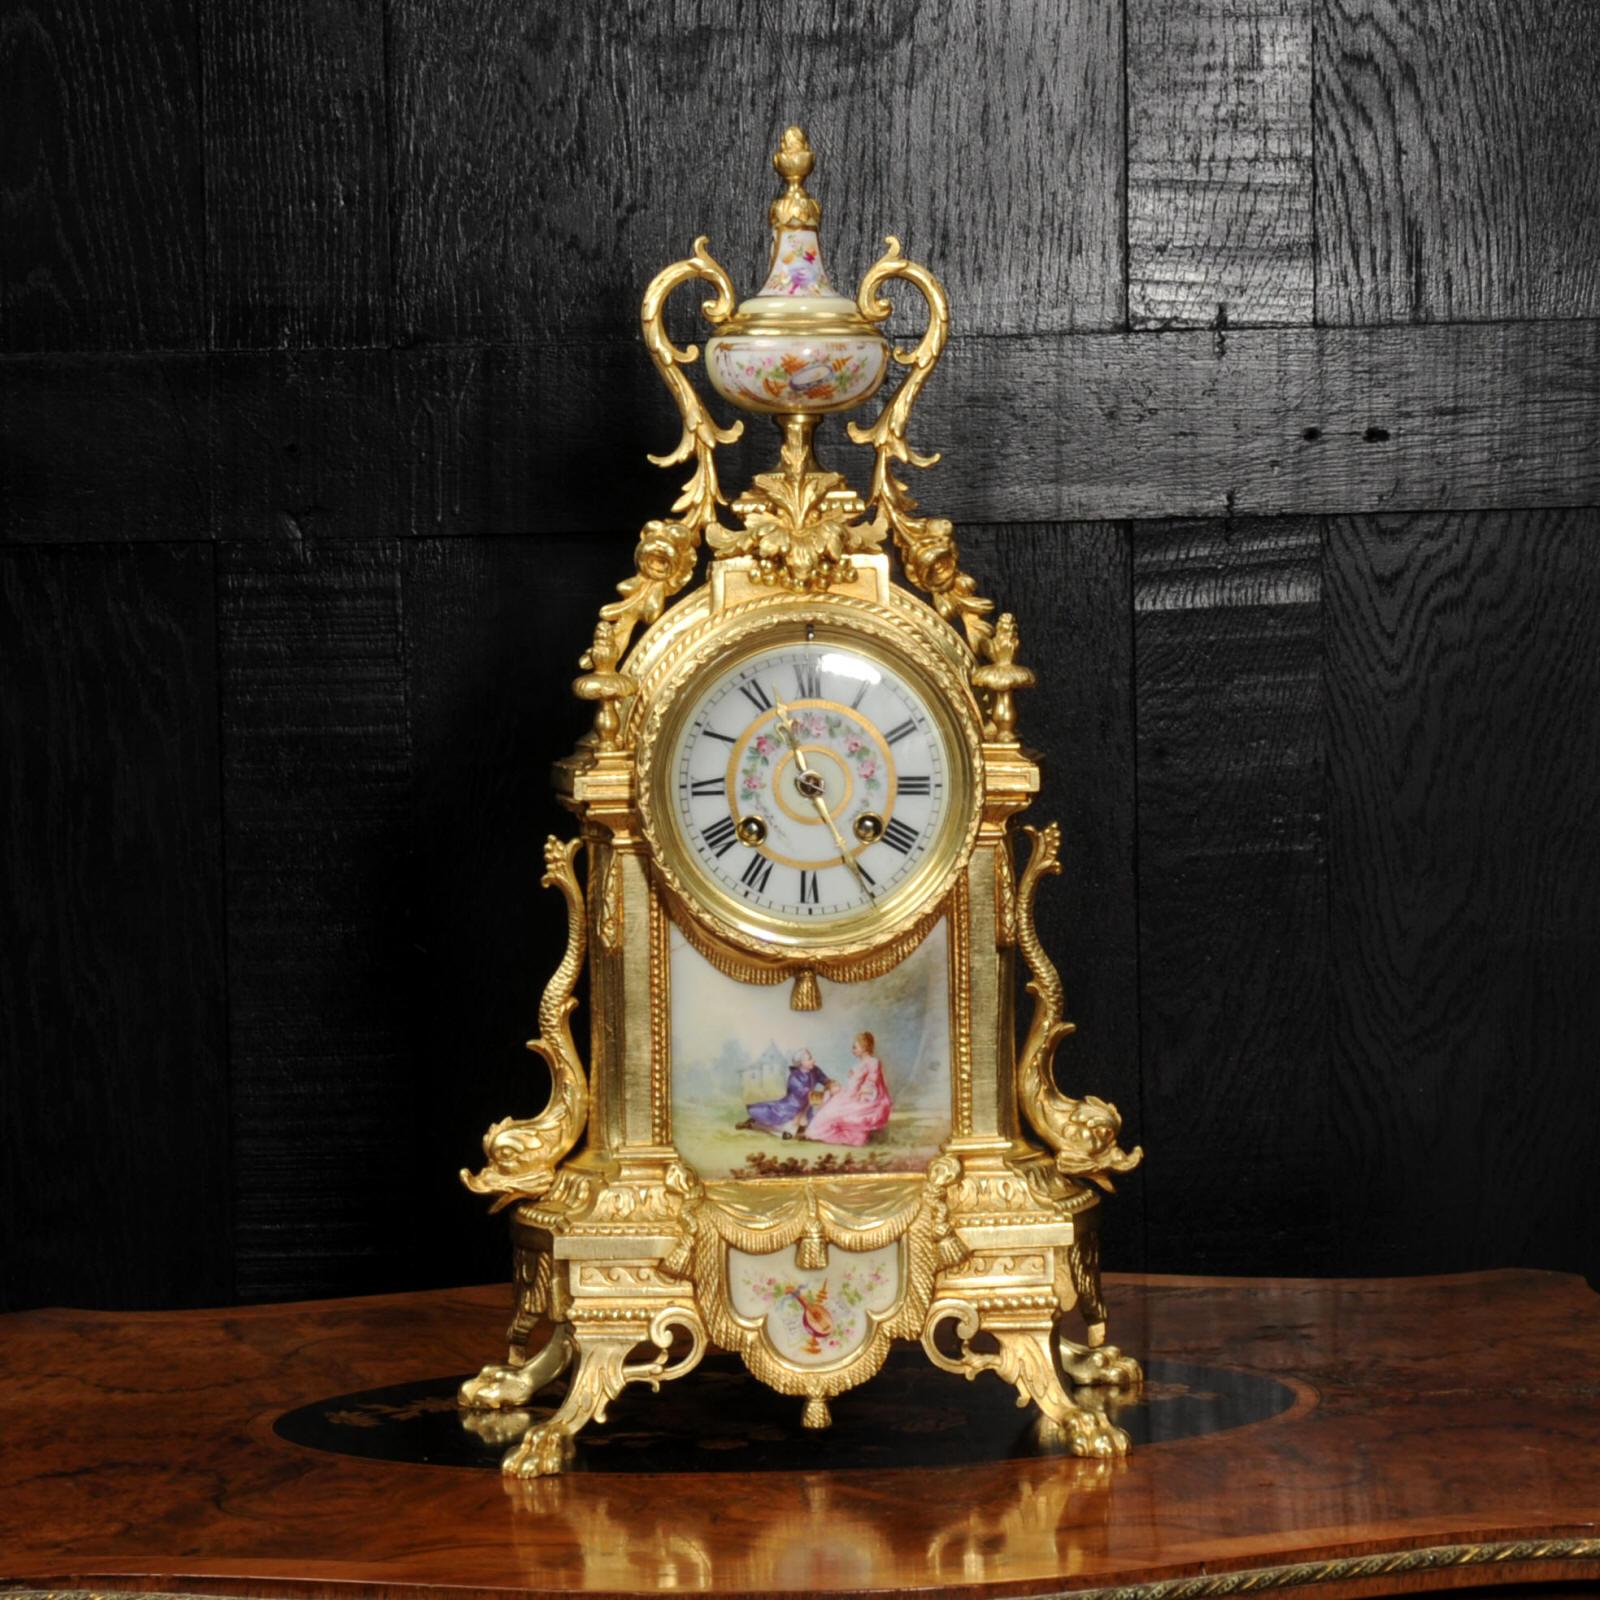 A beautiful antique French gilt bronze clock, mounted with exquisite Sèvres porcelain and with movement by Japy Frères. The large panel shows a gentleman proposing to a lady in a tranquil country setting, a chateau in the background. It is Louis XVI